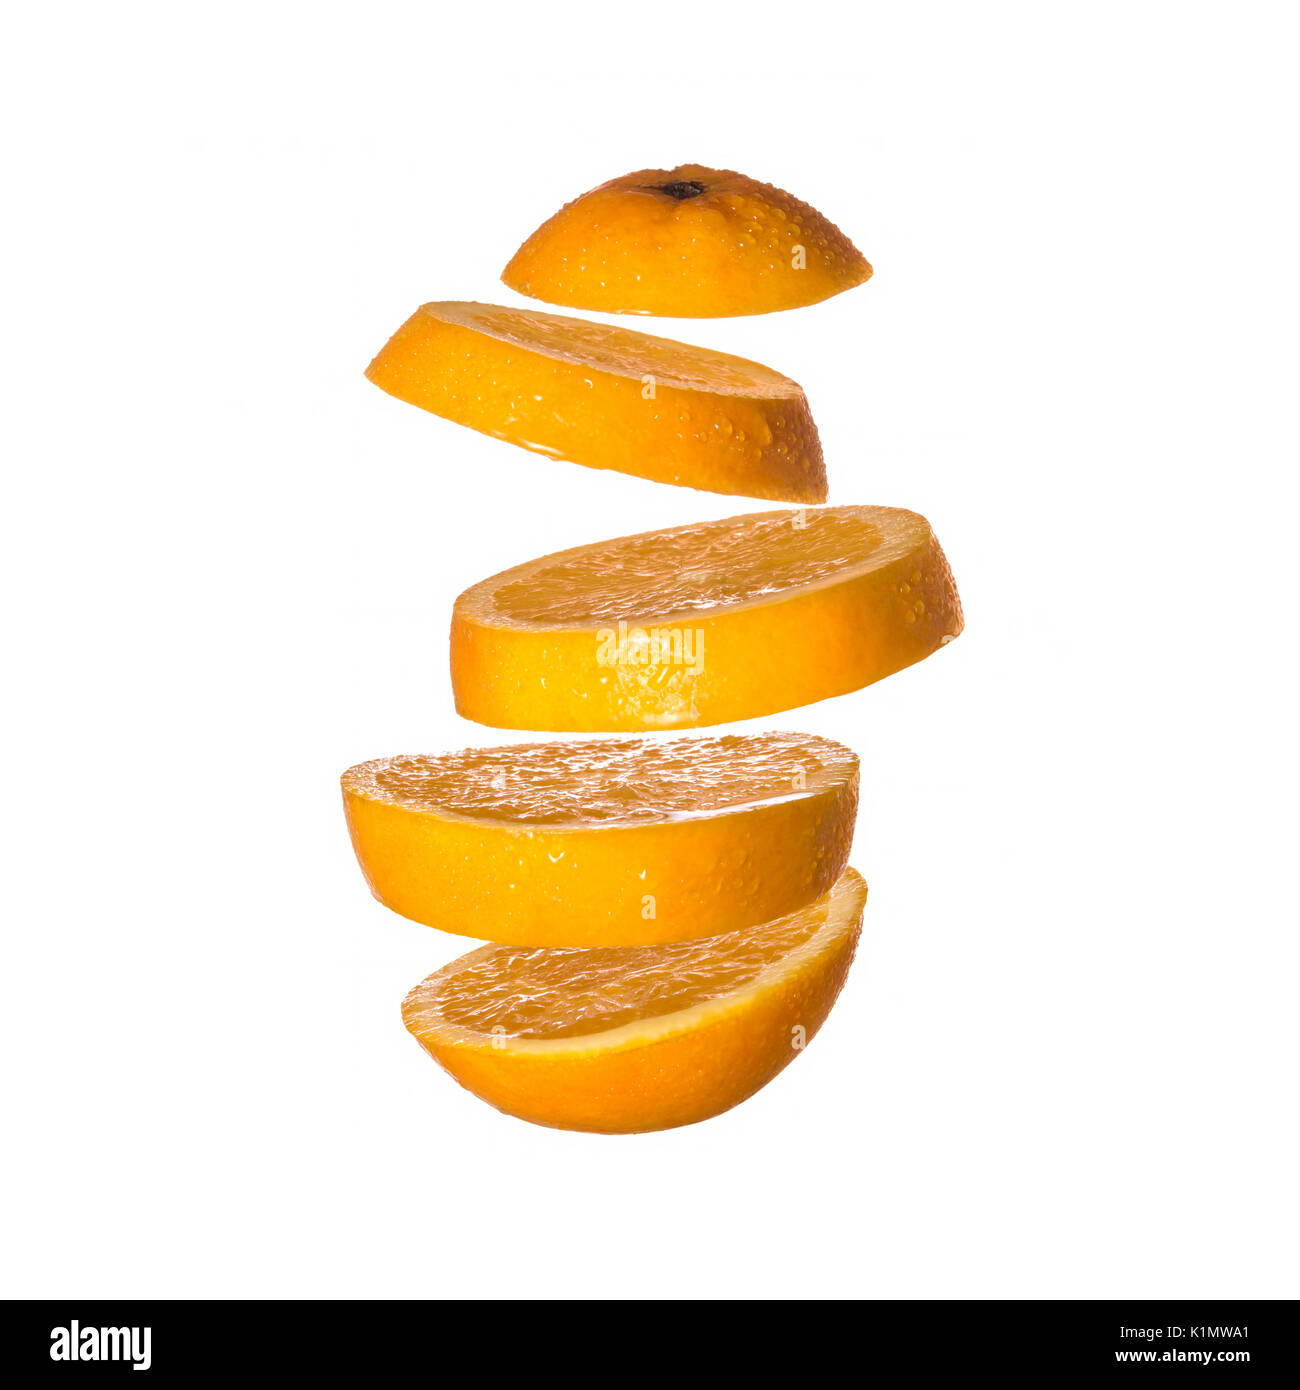 Creative concept with flying orange. Sliced orange isolated on white background. Levity fruit floating in the air. Stock Photo